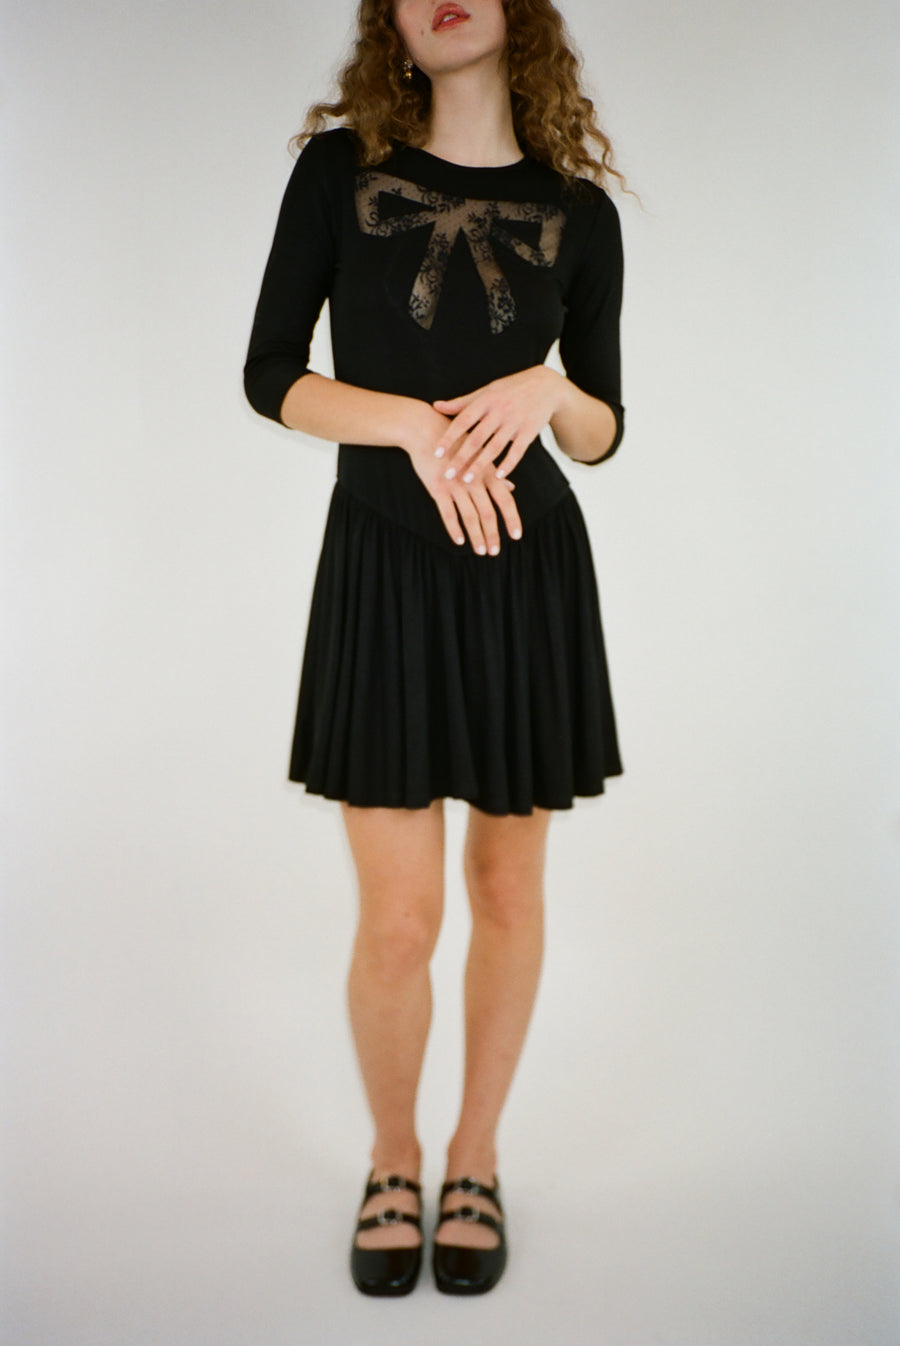 Mini dress in black with lace cut out bow detail on model